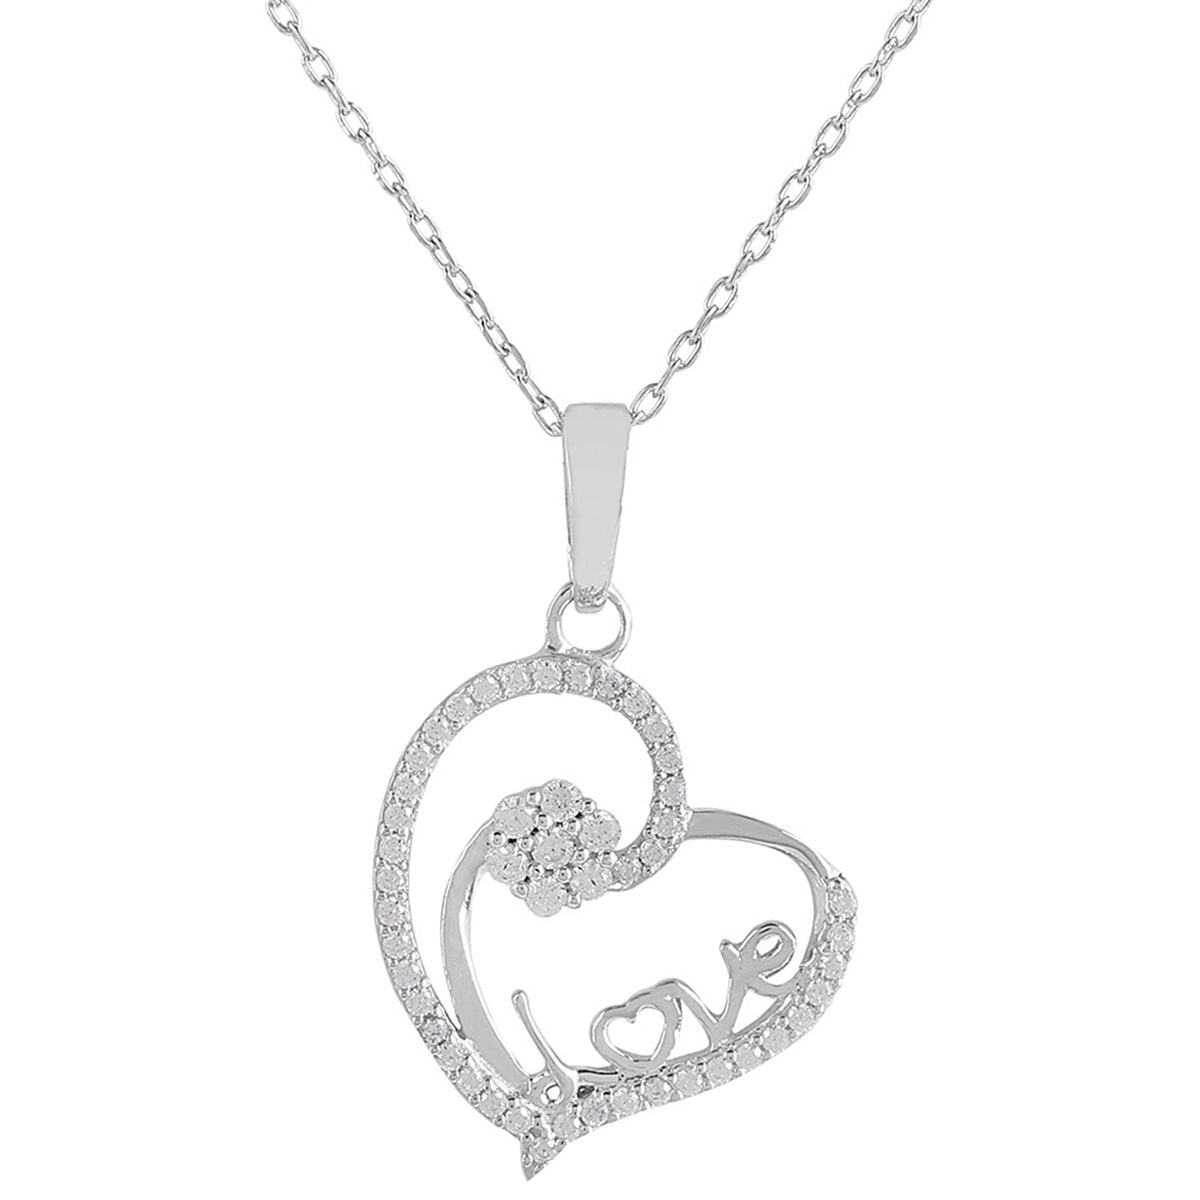 925 Sterling Silver CZ Heart Shaped Pendant with Chain